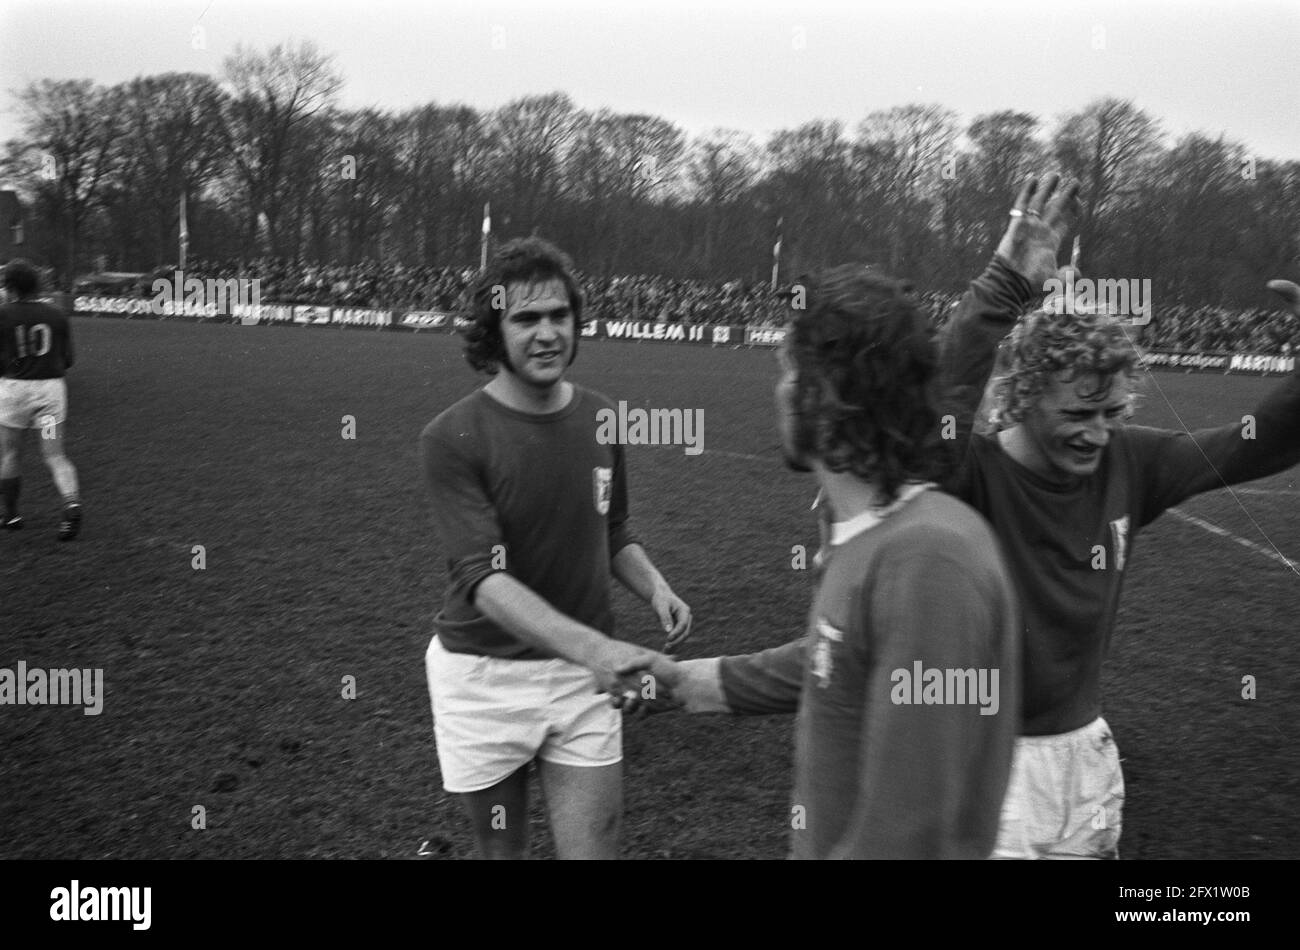 Knvb cup quarter final Black and White Stock Photos & Images - Alamy